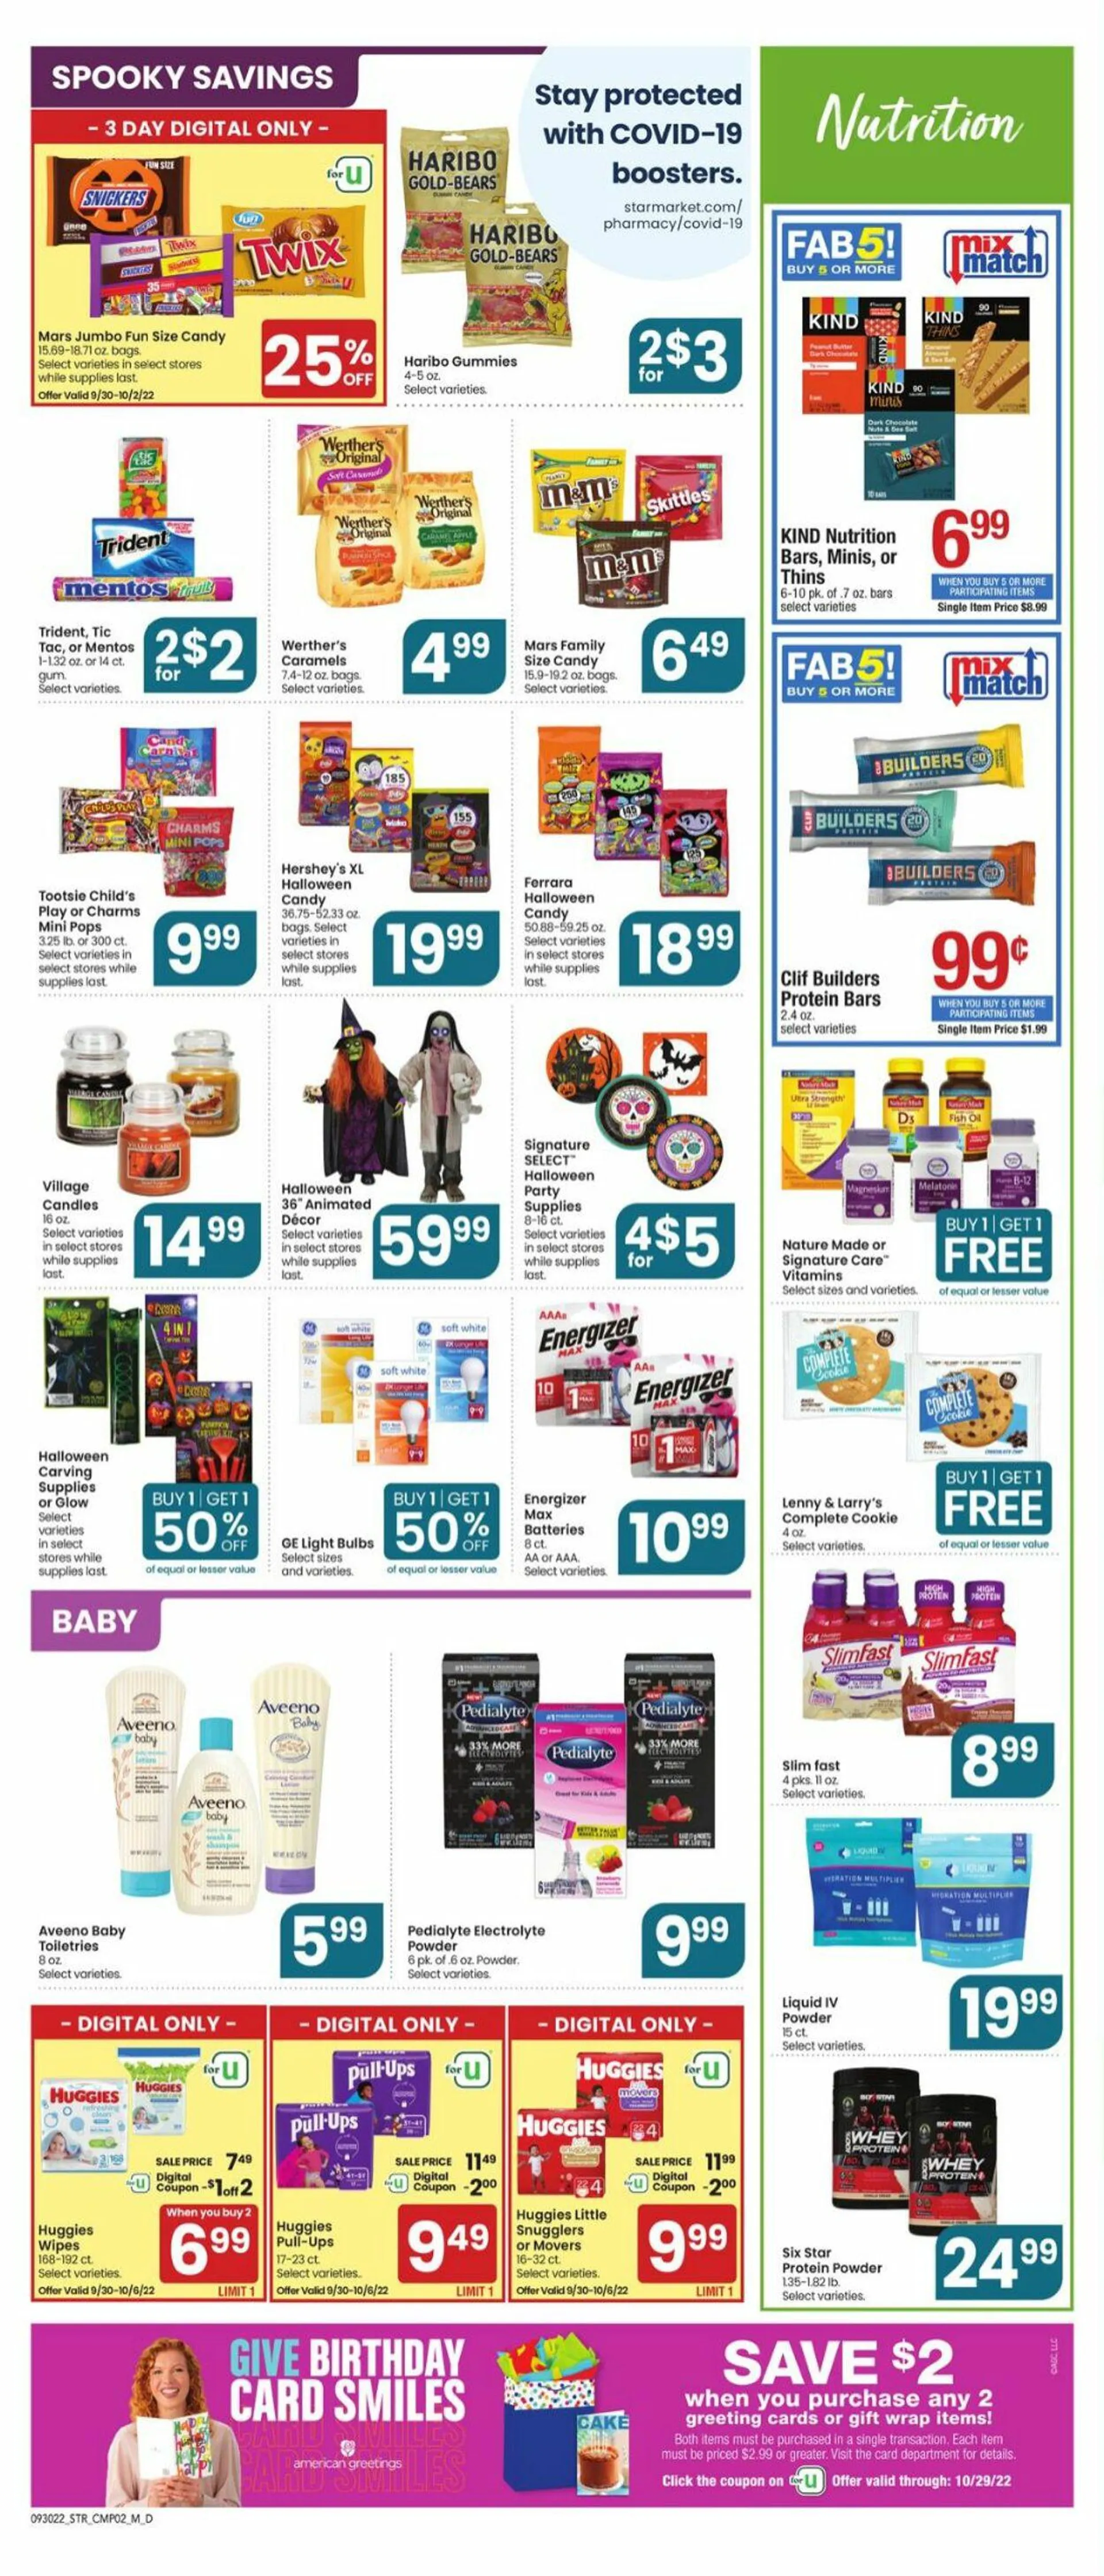 Star Market Current weekly ad - 5